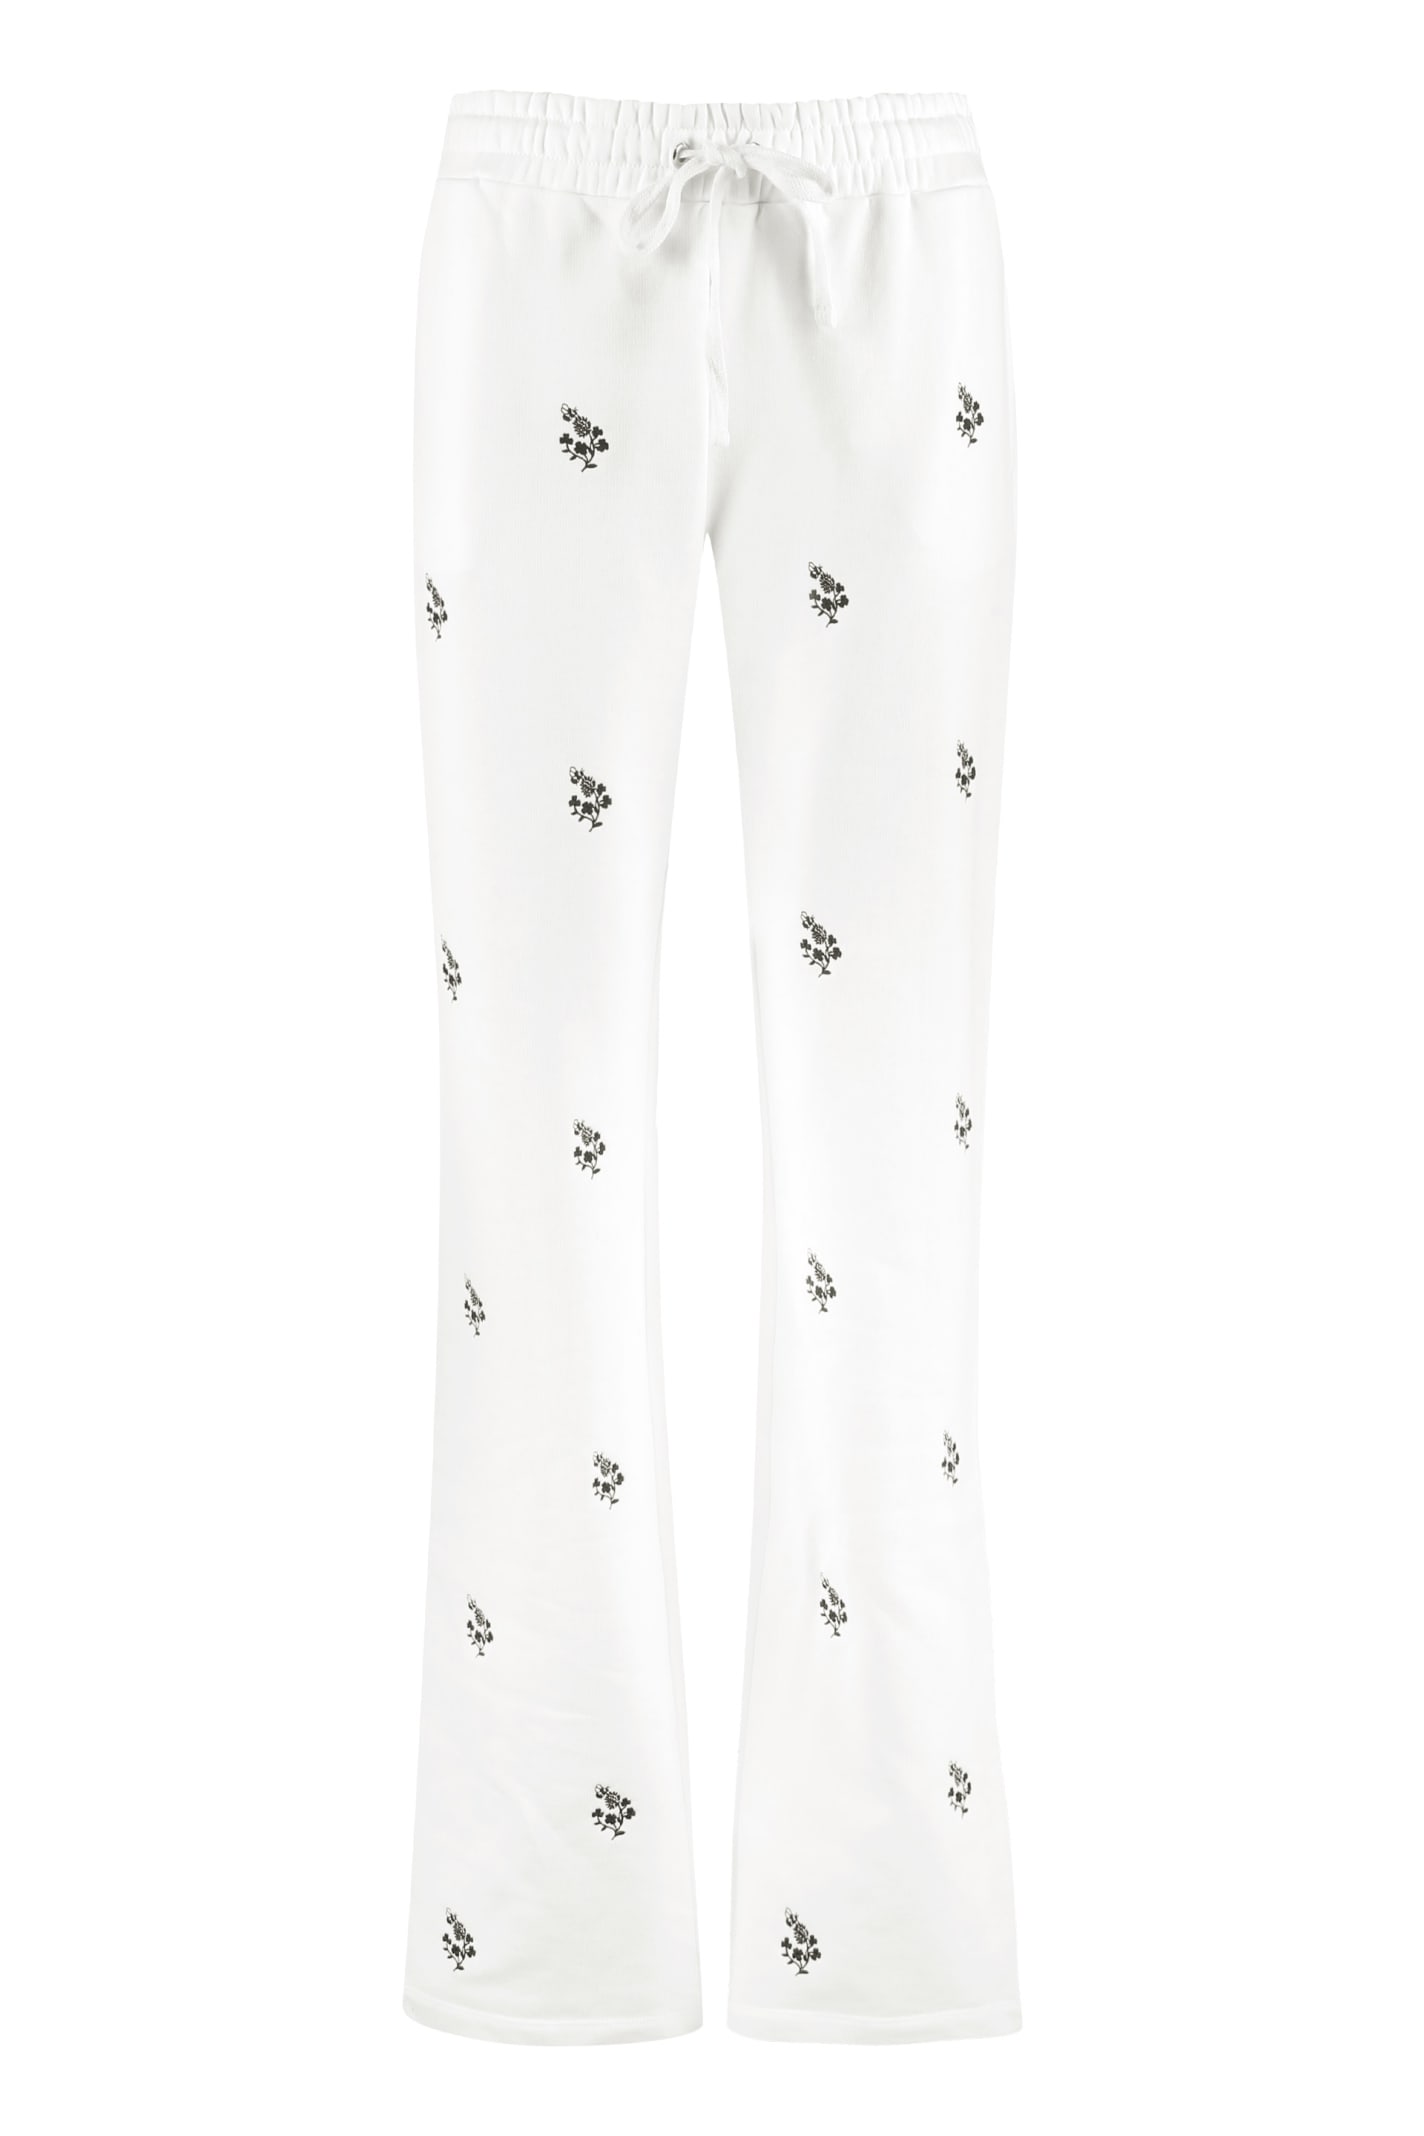 RED Valentino Embroidered Sweatpants